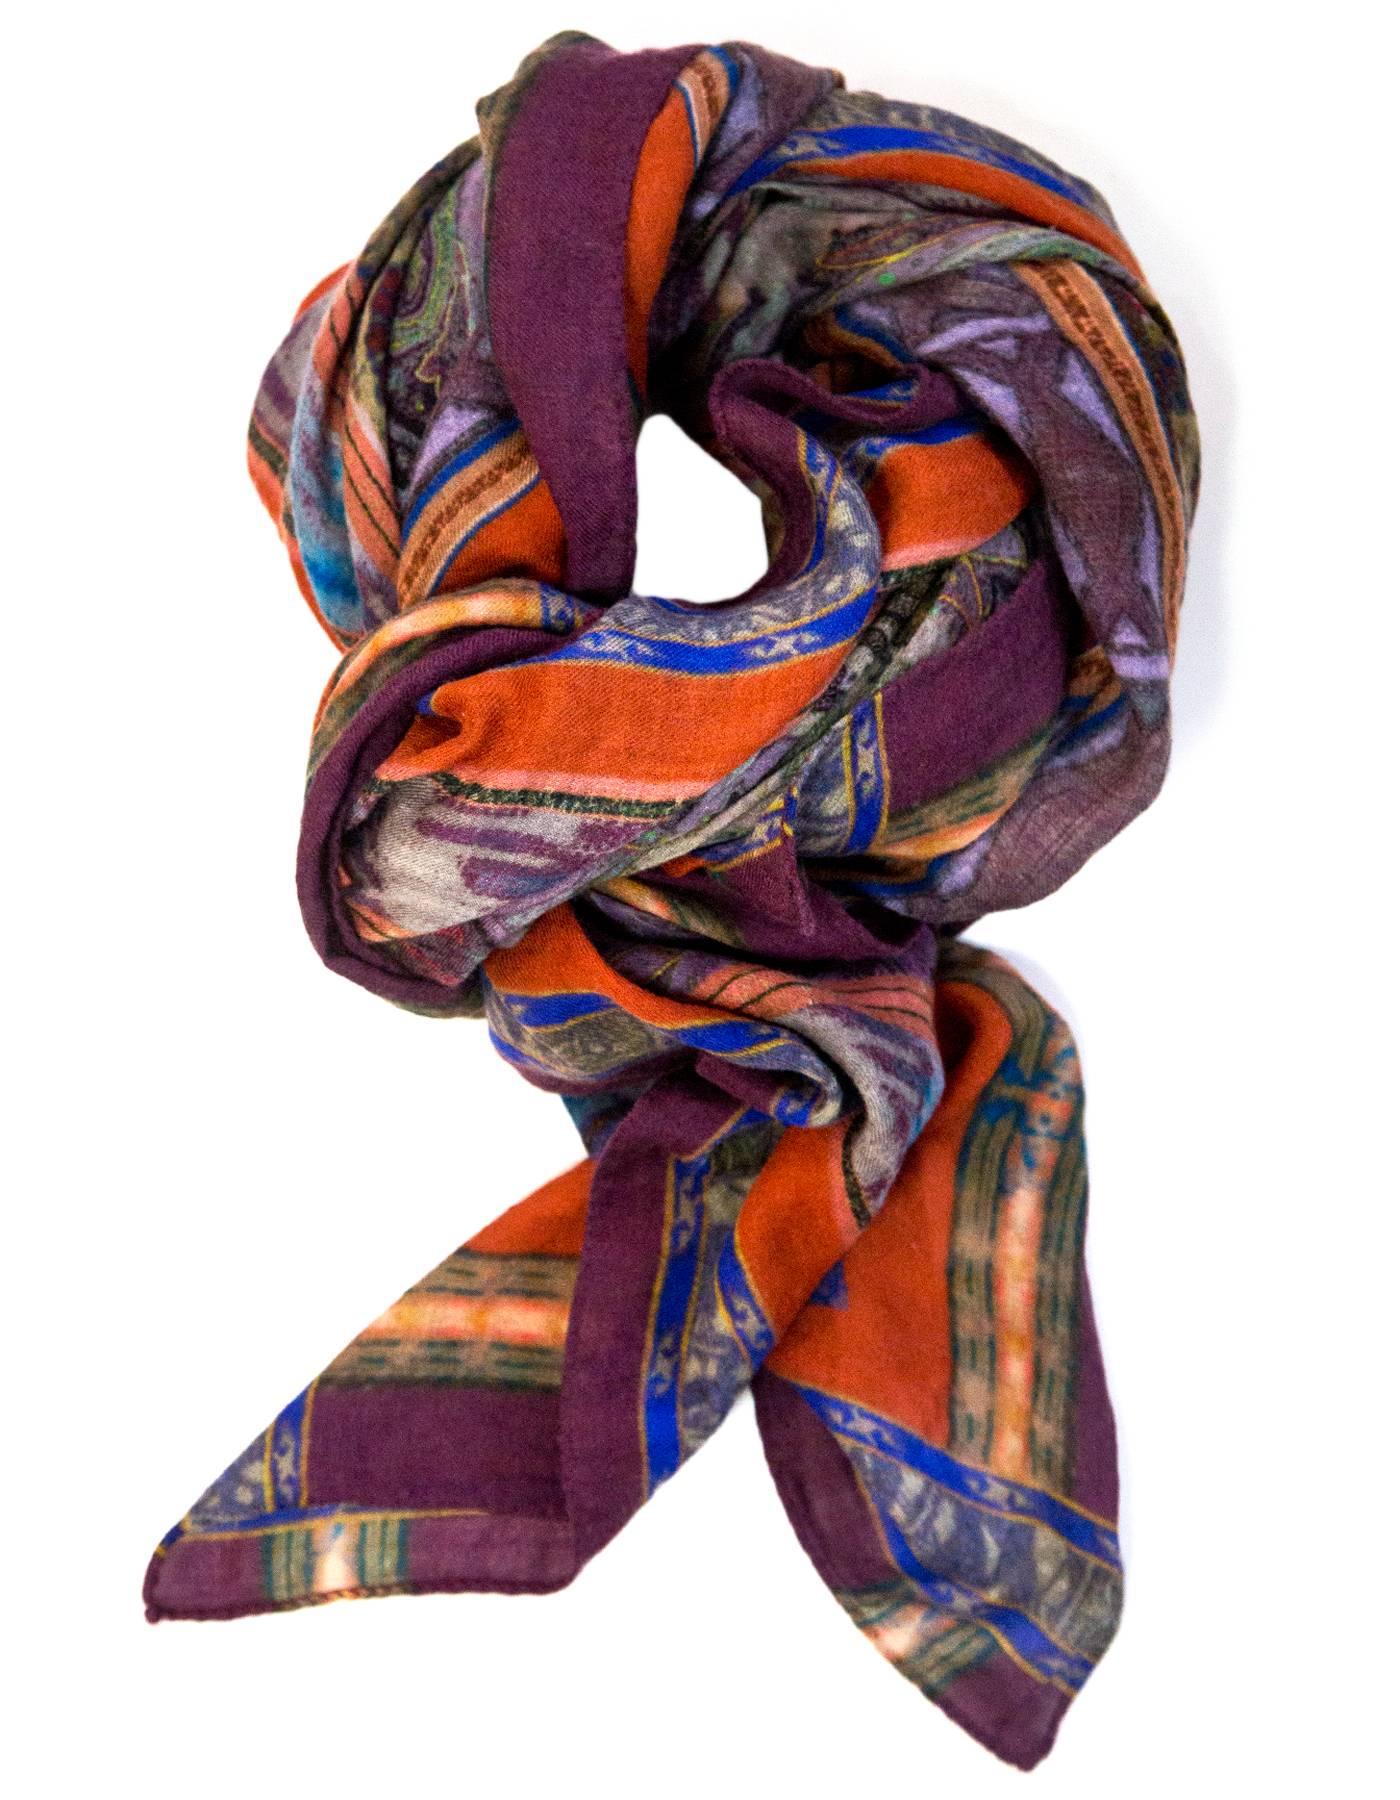 Etro Multi-Color Wool/Silk Scarf

Made In: Italy
Color: Multi
Composition: 50% wool, 50% silk
Overall Condition: Excellent pre-owned condition
Measurements:
Length: 52"
Width: 48"